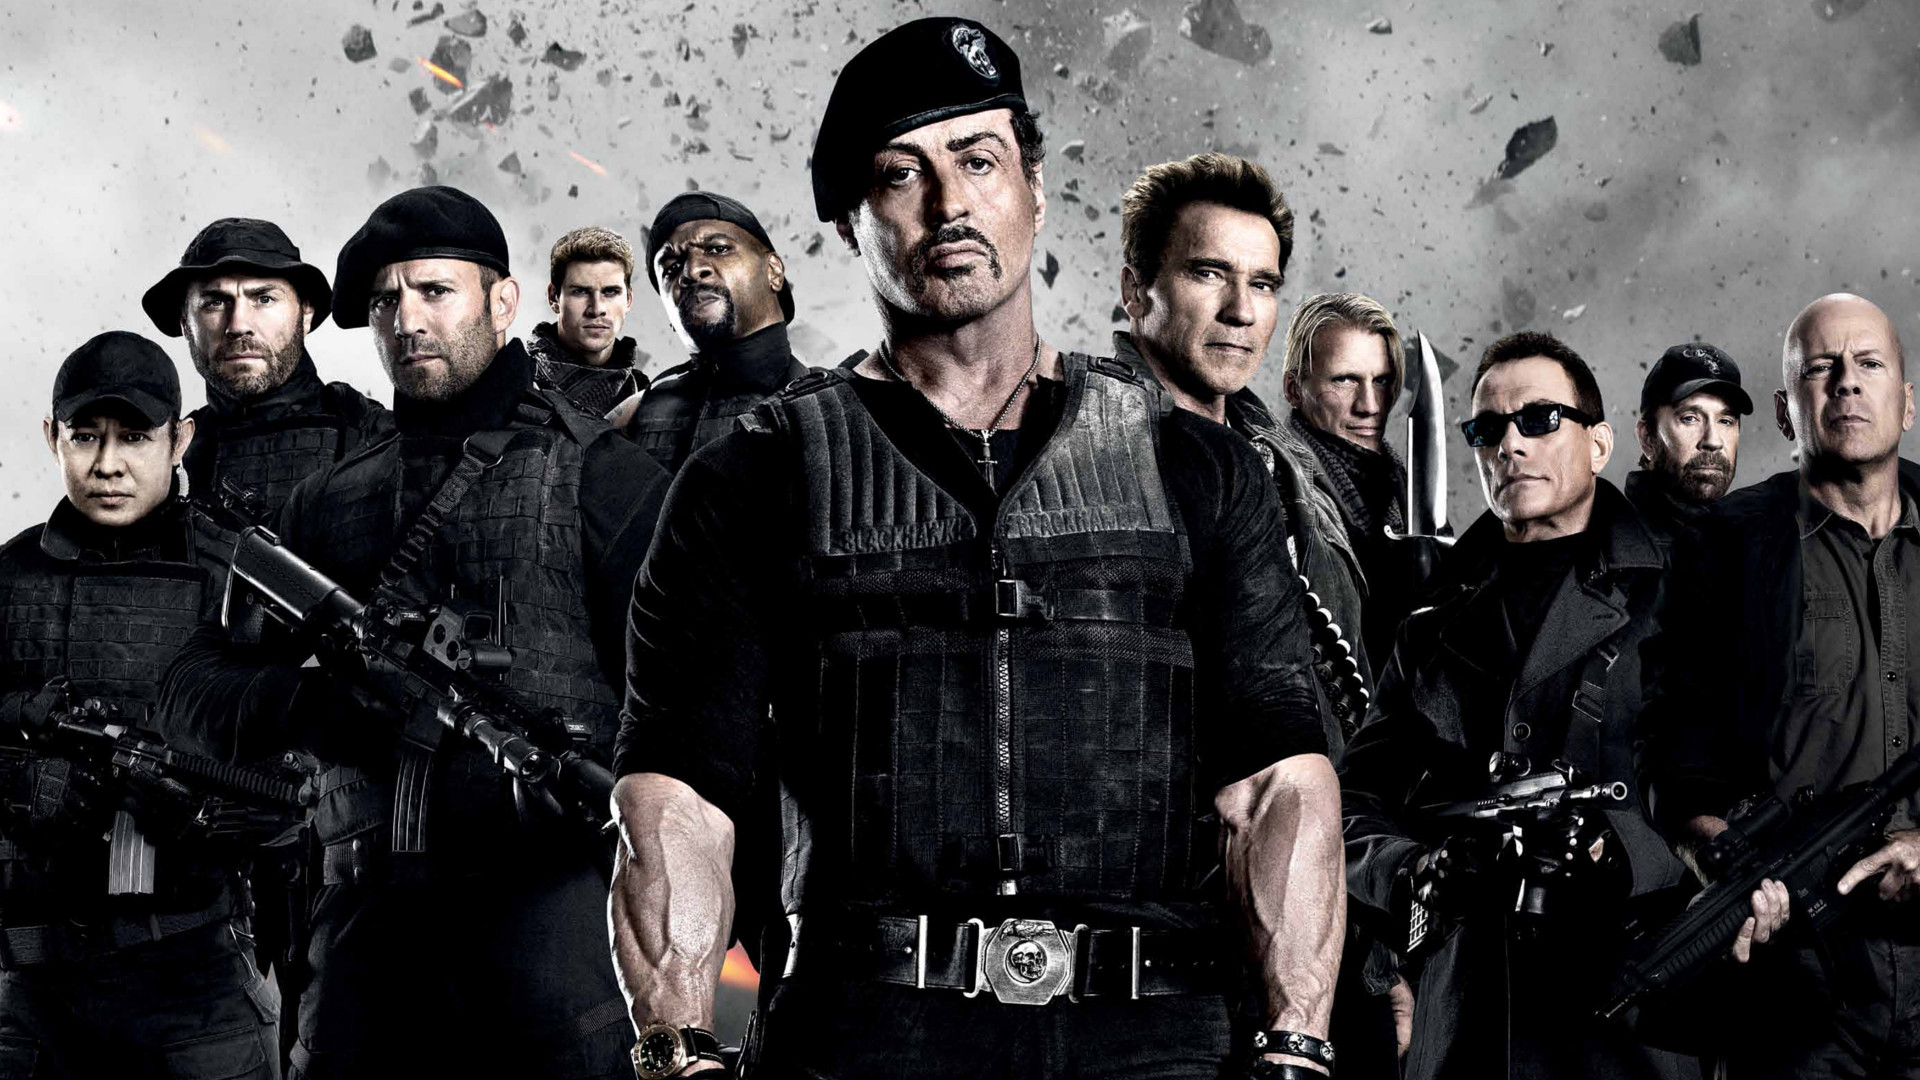 movie, the expendables 2, arnold schwarzenegger, barney ross, billy (the expendables), booker (the expendables), bruce willis, chuck norris, church (the expendables), dolph lundgren, gunnar jensen, hale caesar, jason statham, jean claude van damme, jet li, lee christmas, liam hemsworth, maggie (the expendables), randy couture, sylvester stallone, terry crews, toll road, trench (the expendables), vilain (the expendables), yin yang (the expendables), the expendables Phone Background